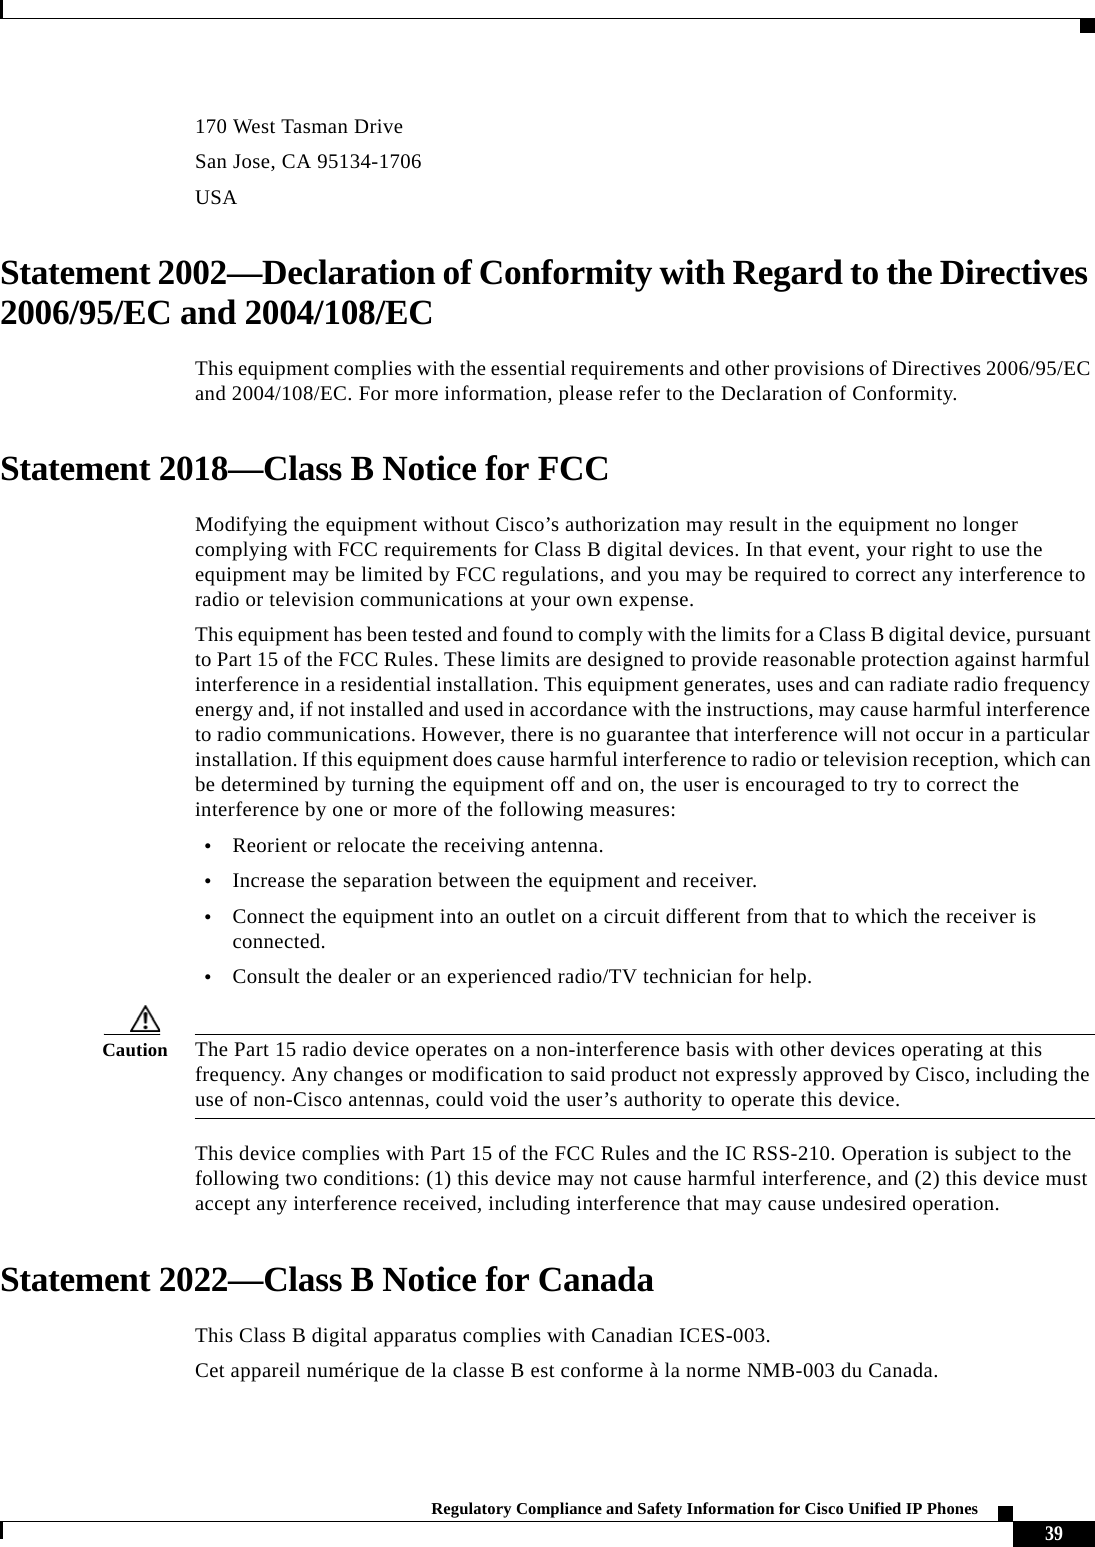  39Regulatory Compliance and Safety Information for Cisco Unified IP Phones 170 West Tasman DriveSan Jose, CA 95134-1706USAStatement 2002—Declaration of Conformity with Regard to the Directives 2006/95/EC and 2004/108/ECThis equipment complies with the essential requirements and other provisions of Directives 2006/95/EC and 2004/108/EC. For more information, please refer to the Declaration of Conformity.Statement 2018—Class B Notice for FCCModifying the equipment without Cisco’s authorization may result in the equipment no longer complying with FCC requirements for Class B digital devices. In that event, your right to use the equipment may be limited by FCC regulations, and you may be required to correct any interference to radio or television communications at your own expense.This equipment has been tested and found to comply with the limits for a Class B digital device, pursuant to Part 15 of the FCC Rules. These limits are designed to provide reasonable protection against harmful interference in a residential installation. This equipment generates, uses and can radiate radio frequency energy and, if not installed and used in accordance with the instructions, may cause harmful interference to radio communications. However, there is no guarantee that interference will not occur in a particular installation. If this equipment does cause harmful interference to radio or television reception, which can be determined by turning the equipment off and on, the user is encouraged to try to correct the interference by one or more of the following measures:•Reorient or relocate the receiving antenna.•Increase the separation between the equipment and receiver.•Connect the equipment into an outlet on a circuit different from that to which the receiver is connected.•Consult the dealer or an experienced radio/TV technician for help.Caution The Part 15 radio device operates on a non-interference basis with other devices operating at this frequency. Any changes or modification to said product not expressly approved by Cisco, including the use of non-Cisco antennas, could void the user’s authority to operate this device.This device complies with Part 15 of the FCC Rules and the IC RSS-210. Operation is subject to the following two conditions: (1) this device may not cause harmful interference, and (2) this device must accept any interference received, including interference that may cause undesired operation.Statement 2022—Class B Notice for CanadaThis Class B digital apparatus complies with Canadian ICES-003.Cet appareil numérique de la classe B est conforme à la norme NMB-003 du Canada.